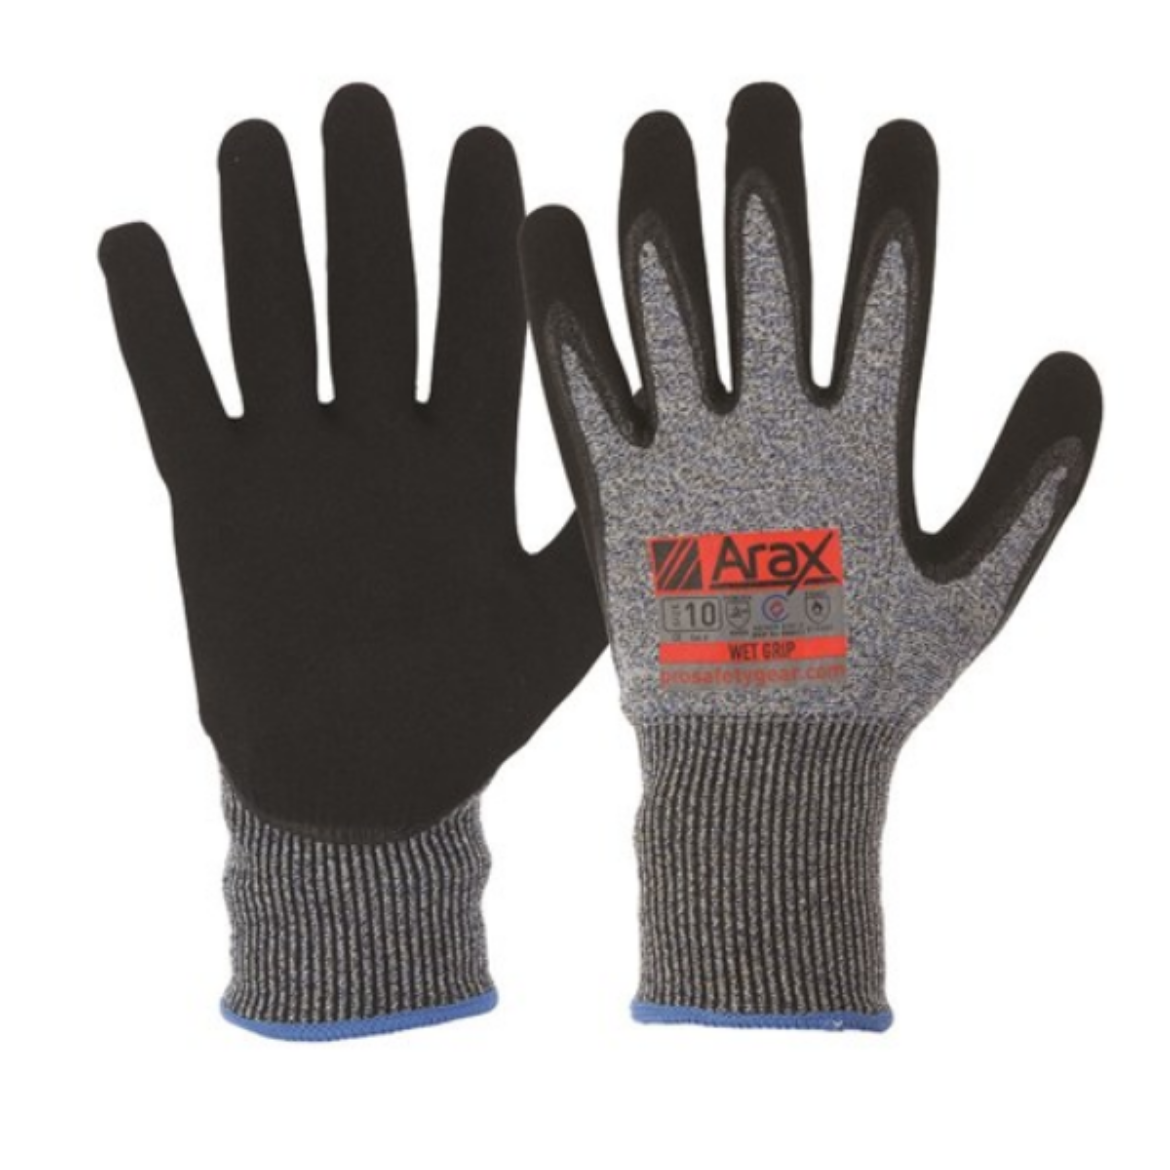 Picture of AND(SIZE) - ARAX WET GRIP - ARAX LINER WITH NITRILE DIP PALM GLOVES.